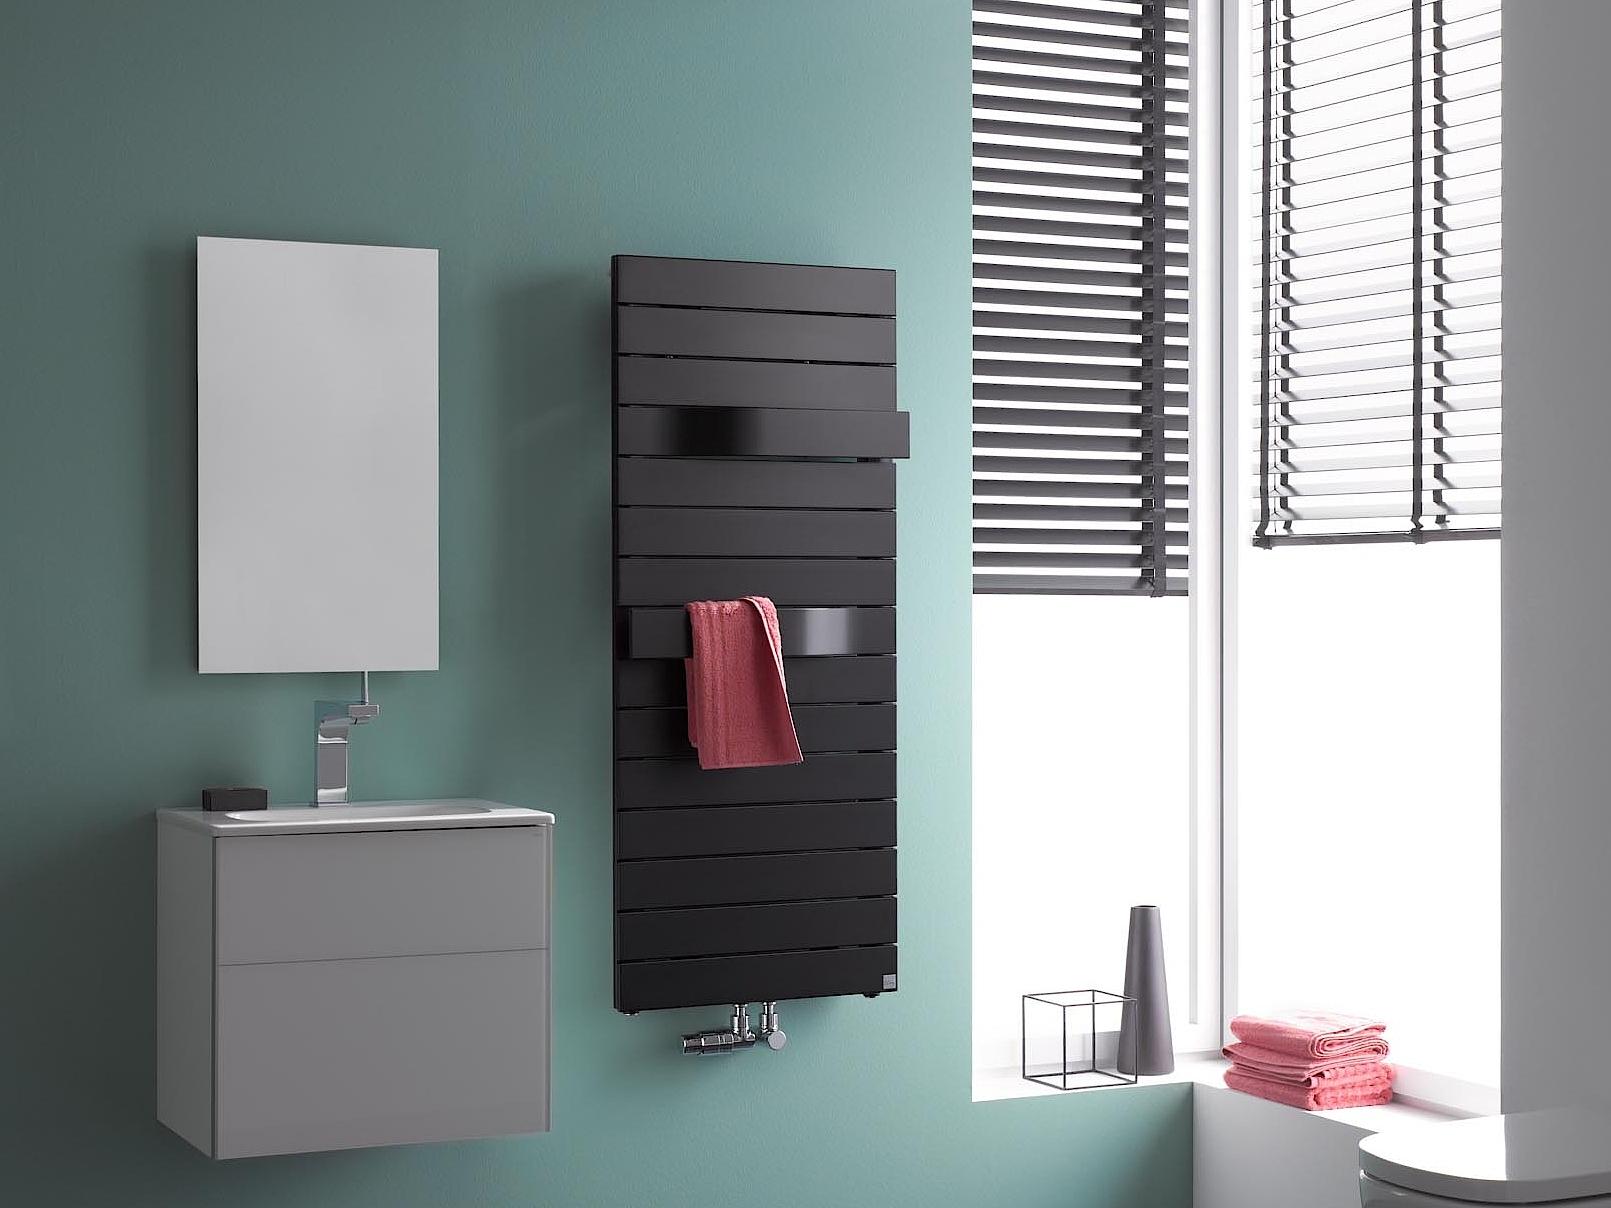 The Kermi Tabeo design and bathroom radiator is also available in Black.